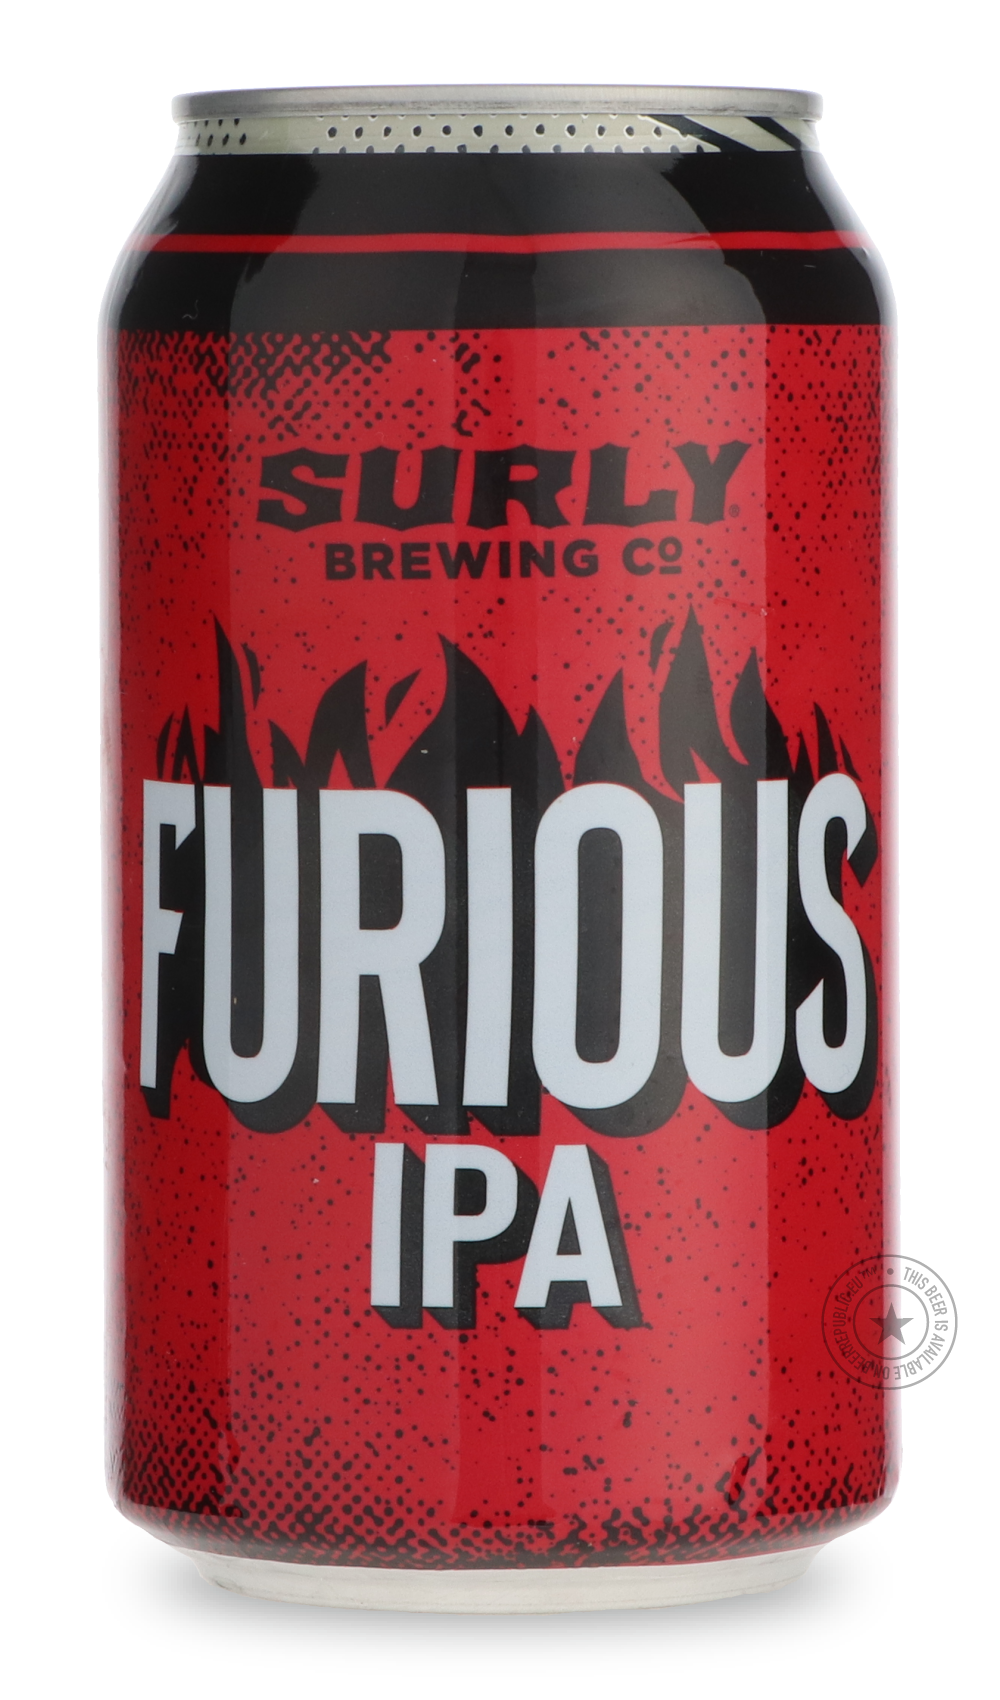 -Surly- Furious [355 ml Can]-IPA- Only @ Beer Republic - The best online beer store for American & Canadian craft beer - Buy beer online from the USA and Canada - Bier online kopen - Amerikaans bier kopen - Craft beer store - Craft beer kopen - Amerikanisch bier kaufen - Bier online kaufen - Acheter biere online - IPA - Stout - Porter - New England IPA - Hazy IPA - Imperial Stout - Barrel Aged - Barrel Aged Imperial Stout - Brown - Dark beer - Blond - Blonde - Pilsner - Lager - Wheat - Weizen - Amber - Barl